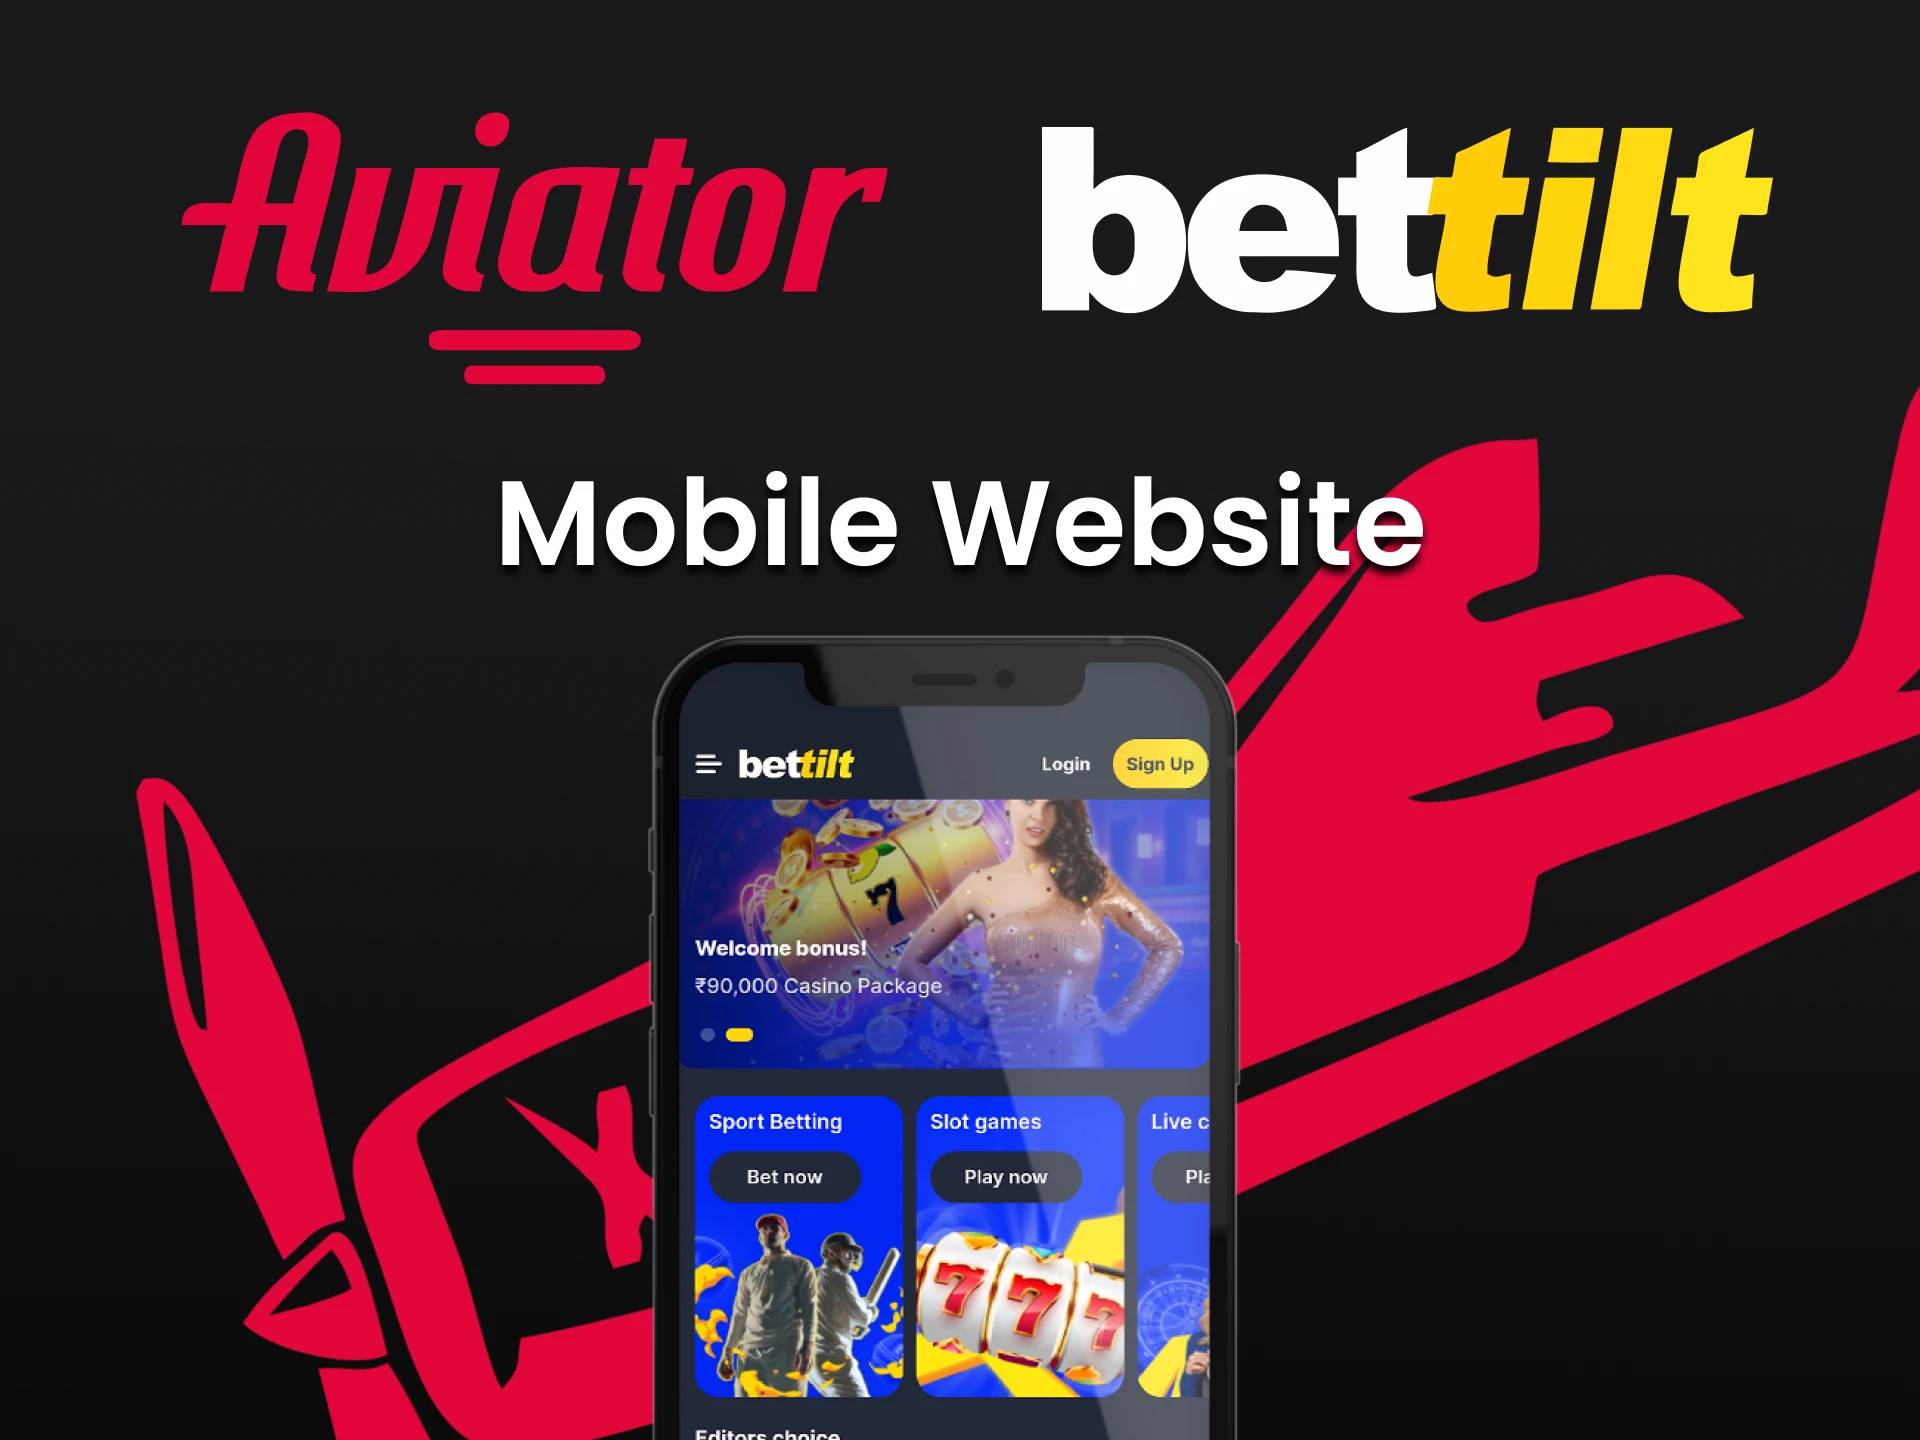 Use Bettilt website via the mobile version of the site.